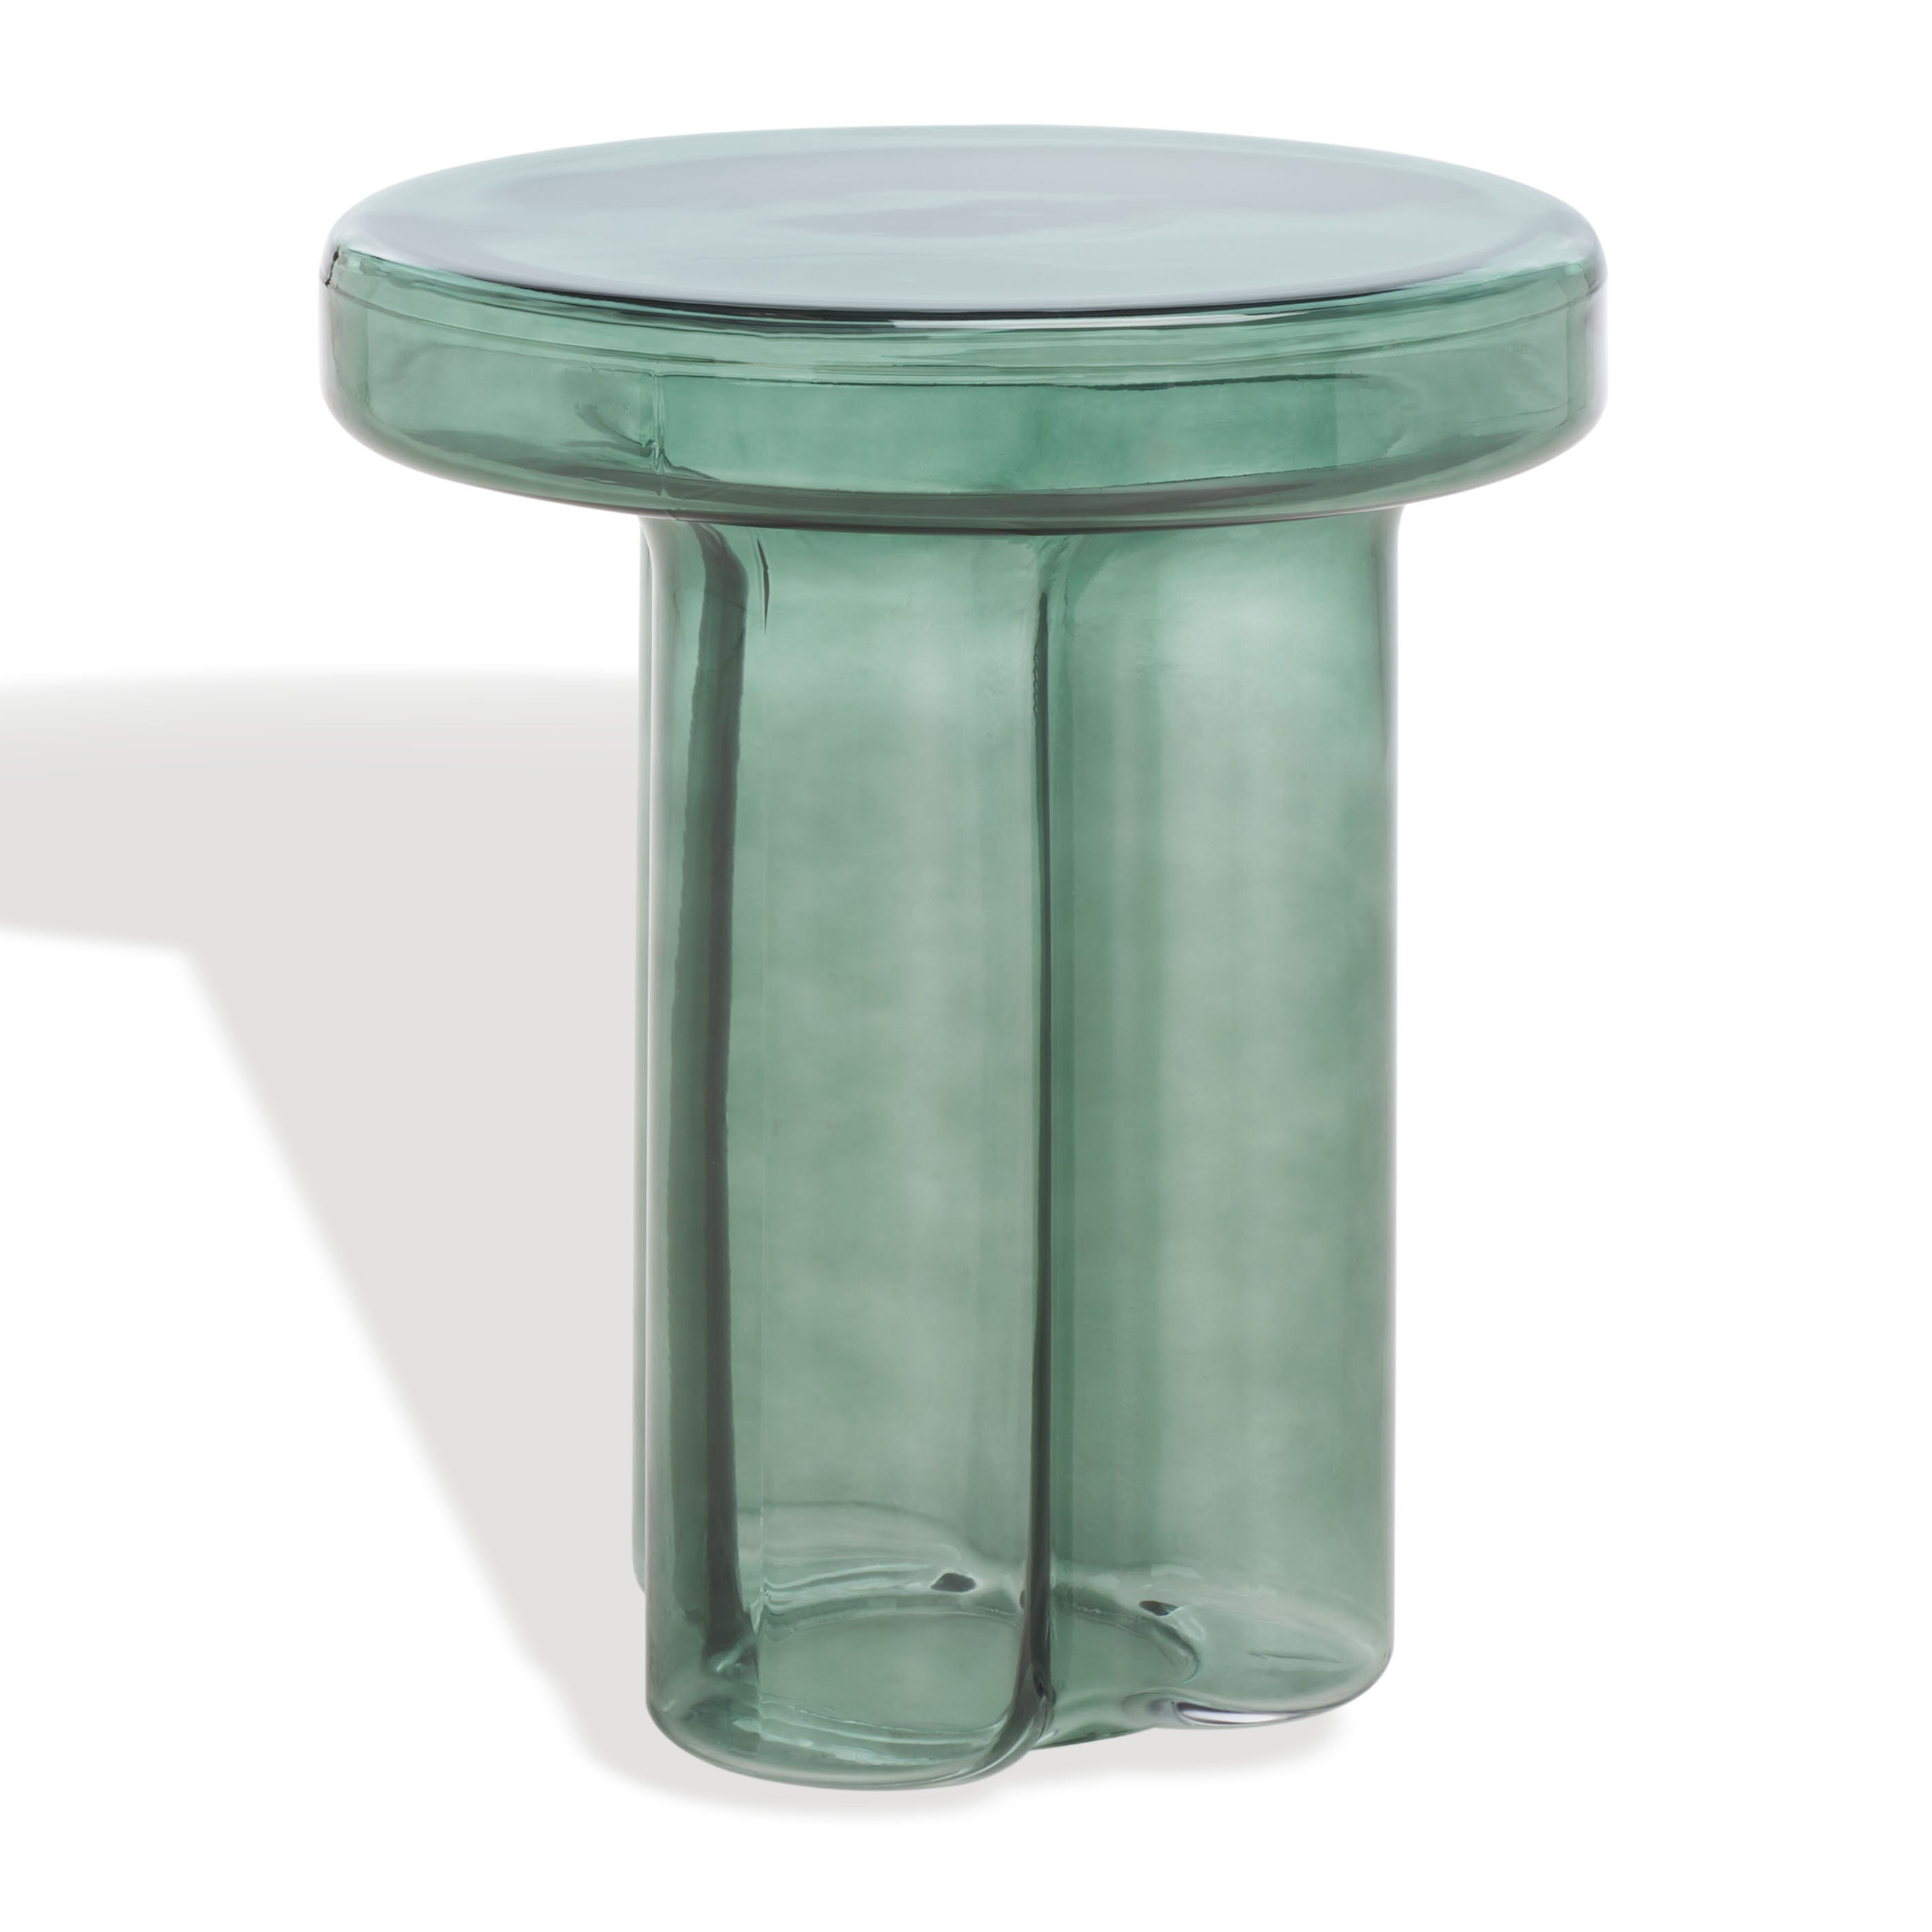 safavieh couture patterson glass accent table, sfv1201 - Green